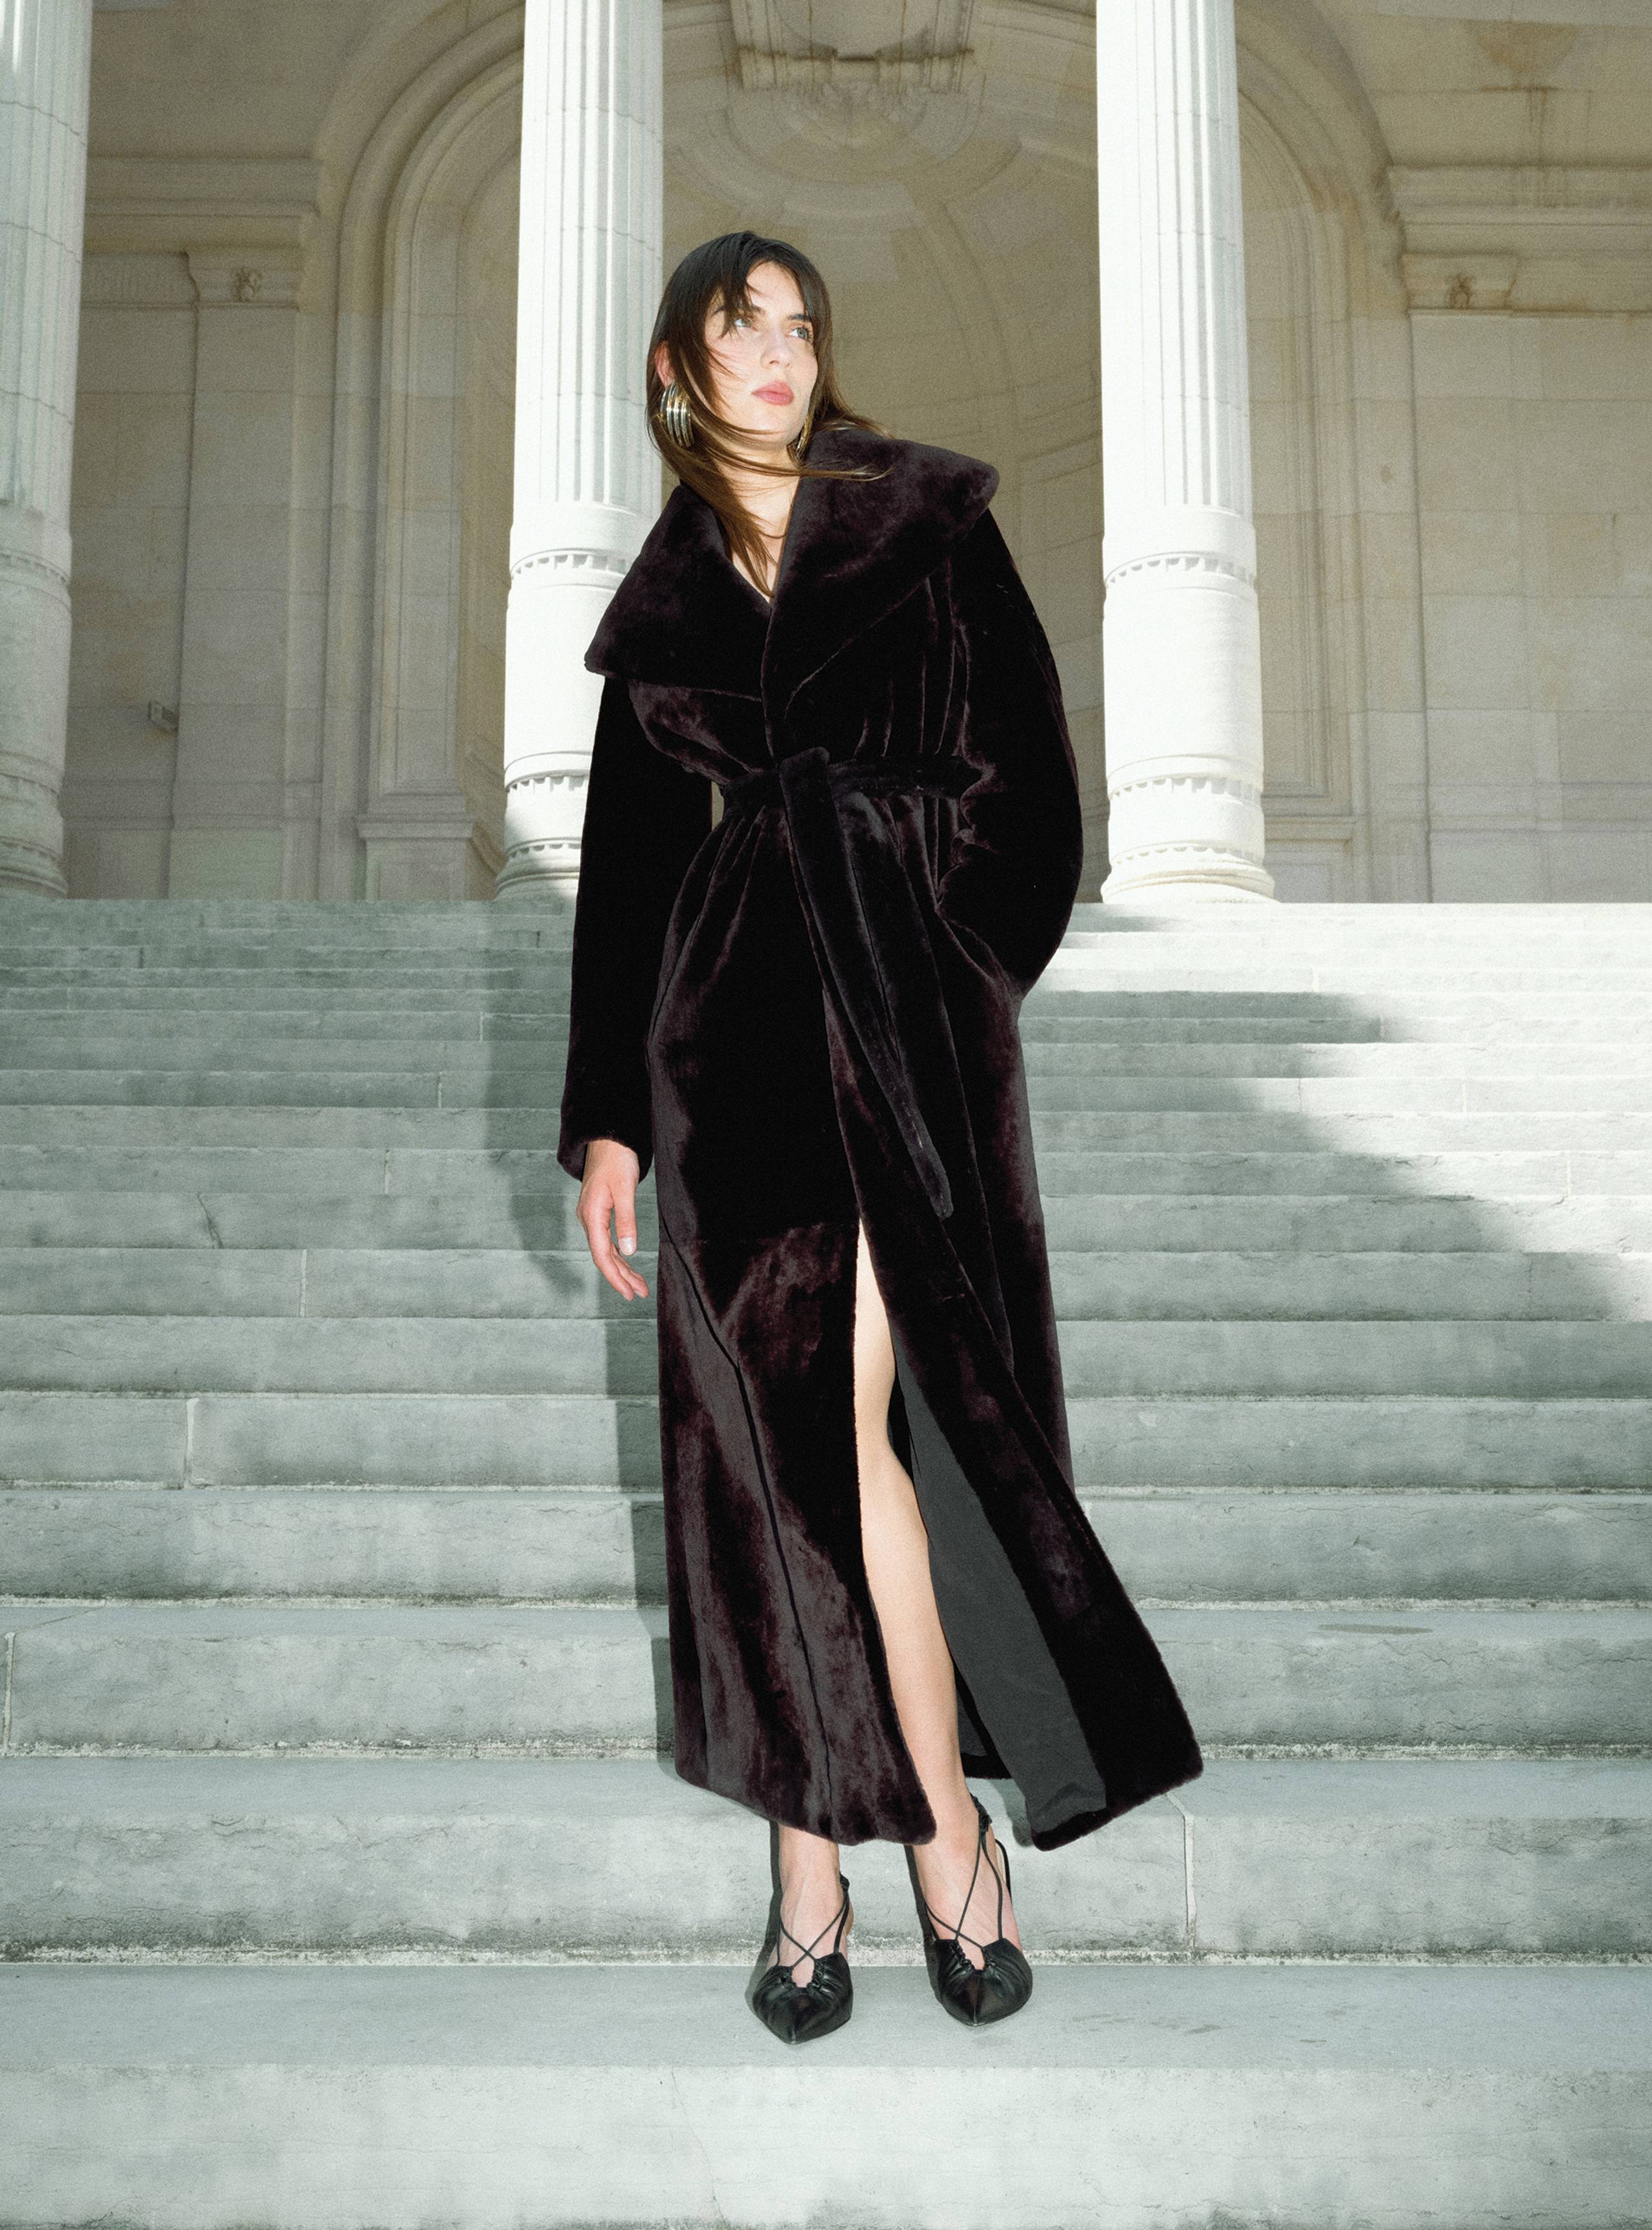 A model standing on a staircase wearing the Giovana Chocolate Fondant long shearling coat